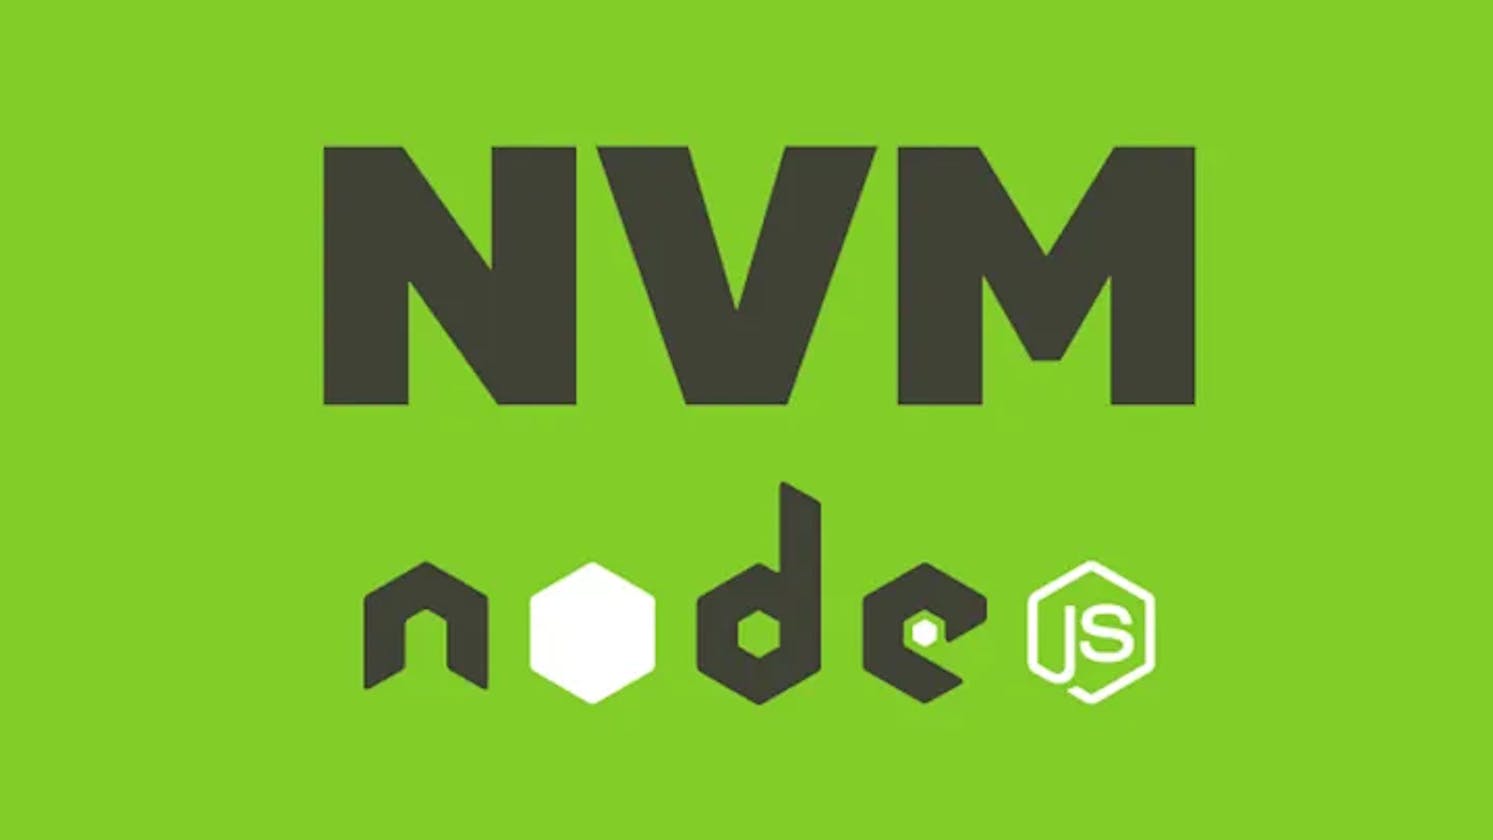 How to install NVM (Node Version Manager) in Garuda linux or Arch Linux based